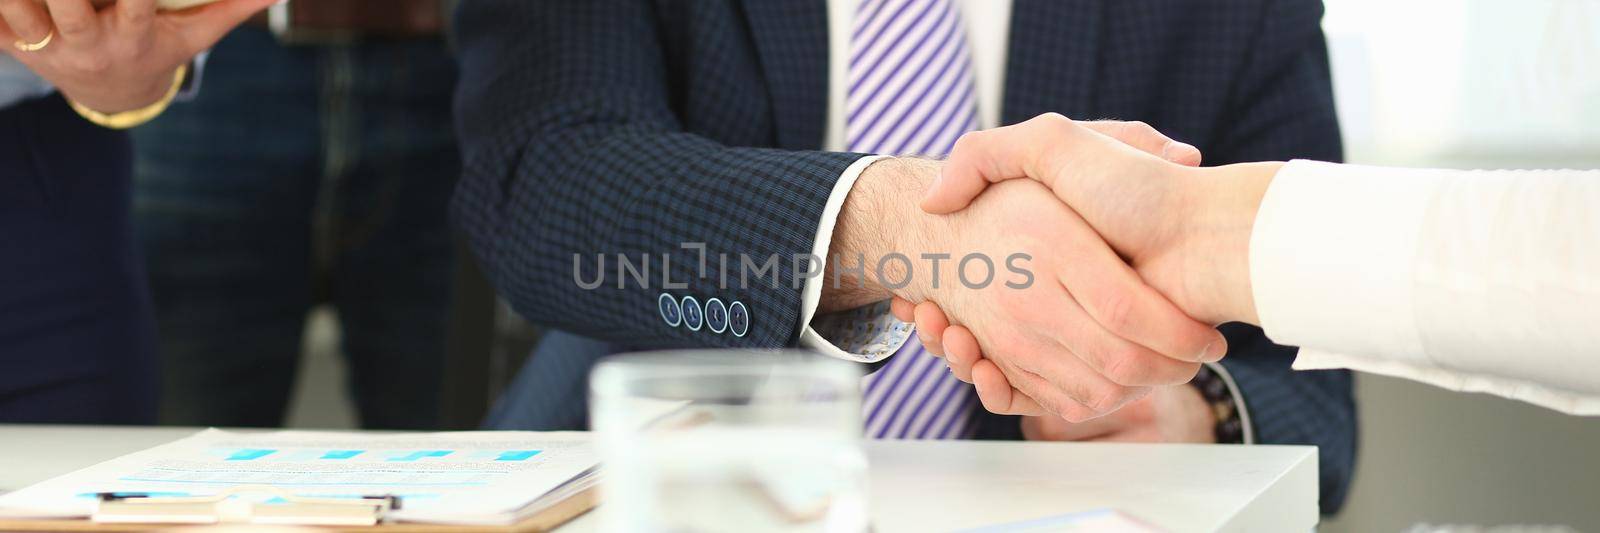 Focus on business male performing friendly gesture towards colleague. Smart man in classy suit shaking hands with young manager. Company meeting concept. Blurred background